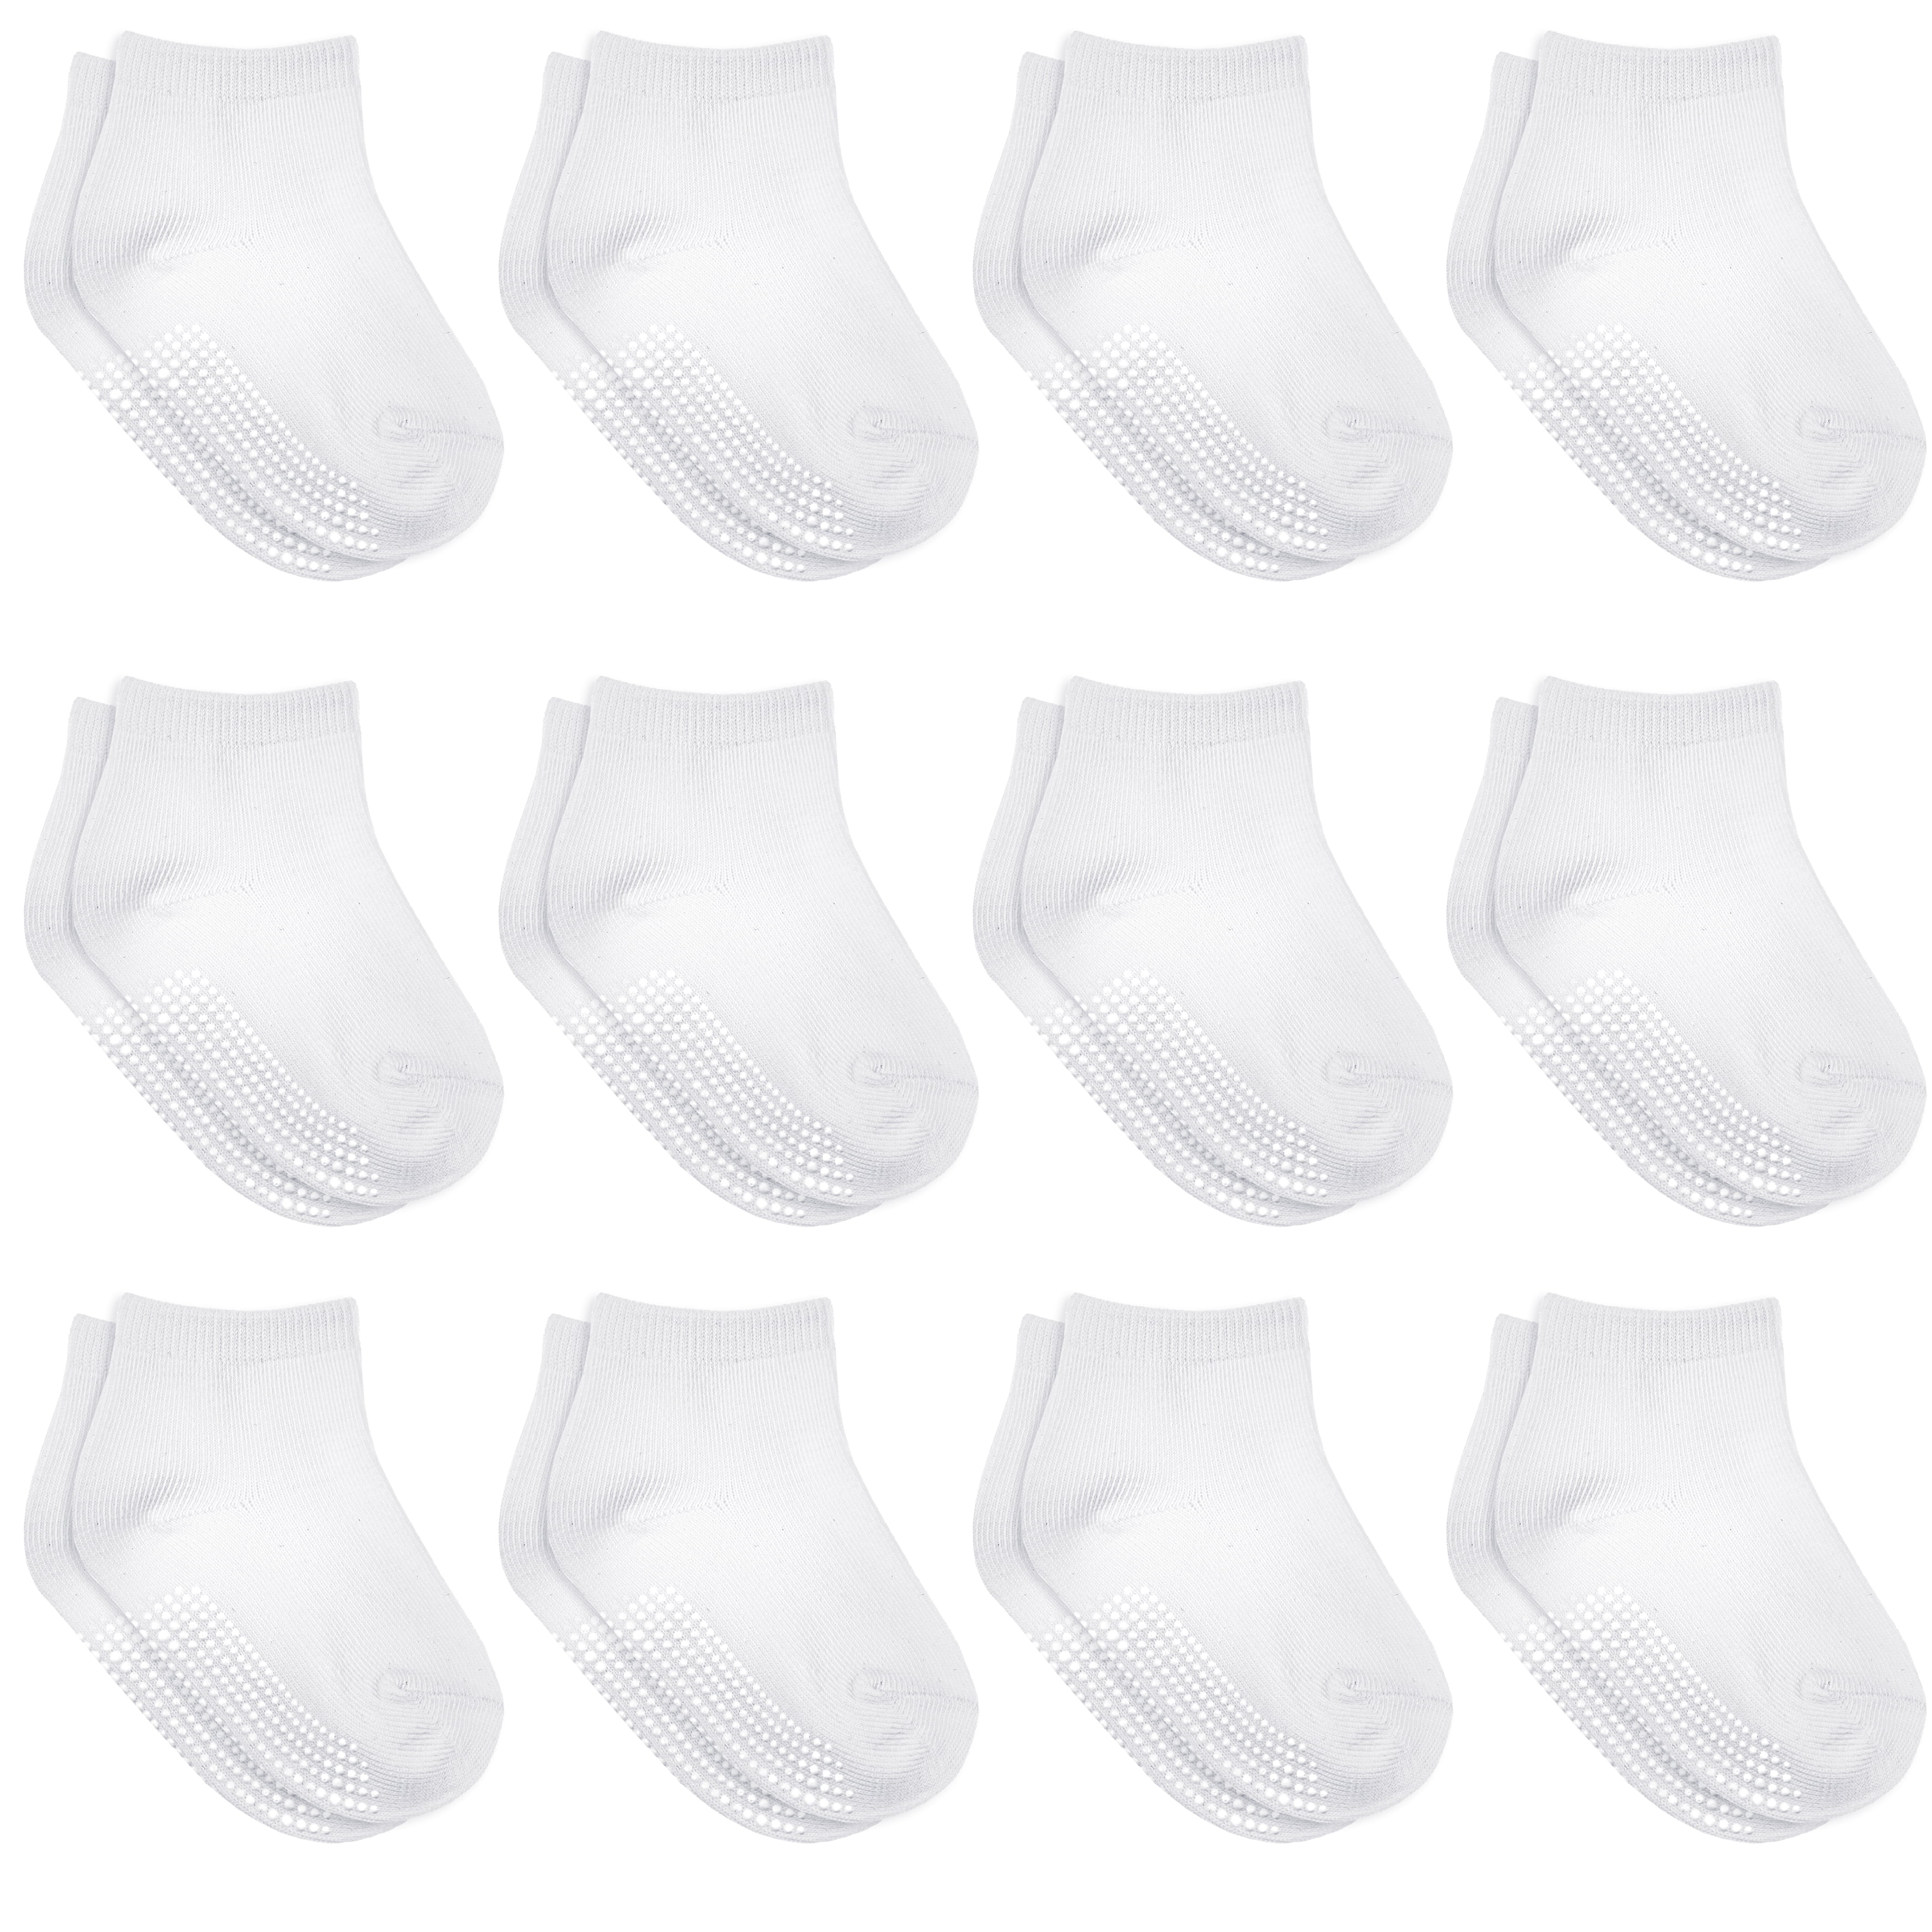 Baby Toddler Knee High Anti Slip Non Skid Cotton Socks with Grips for Girls and Boys 0-3 Years